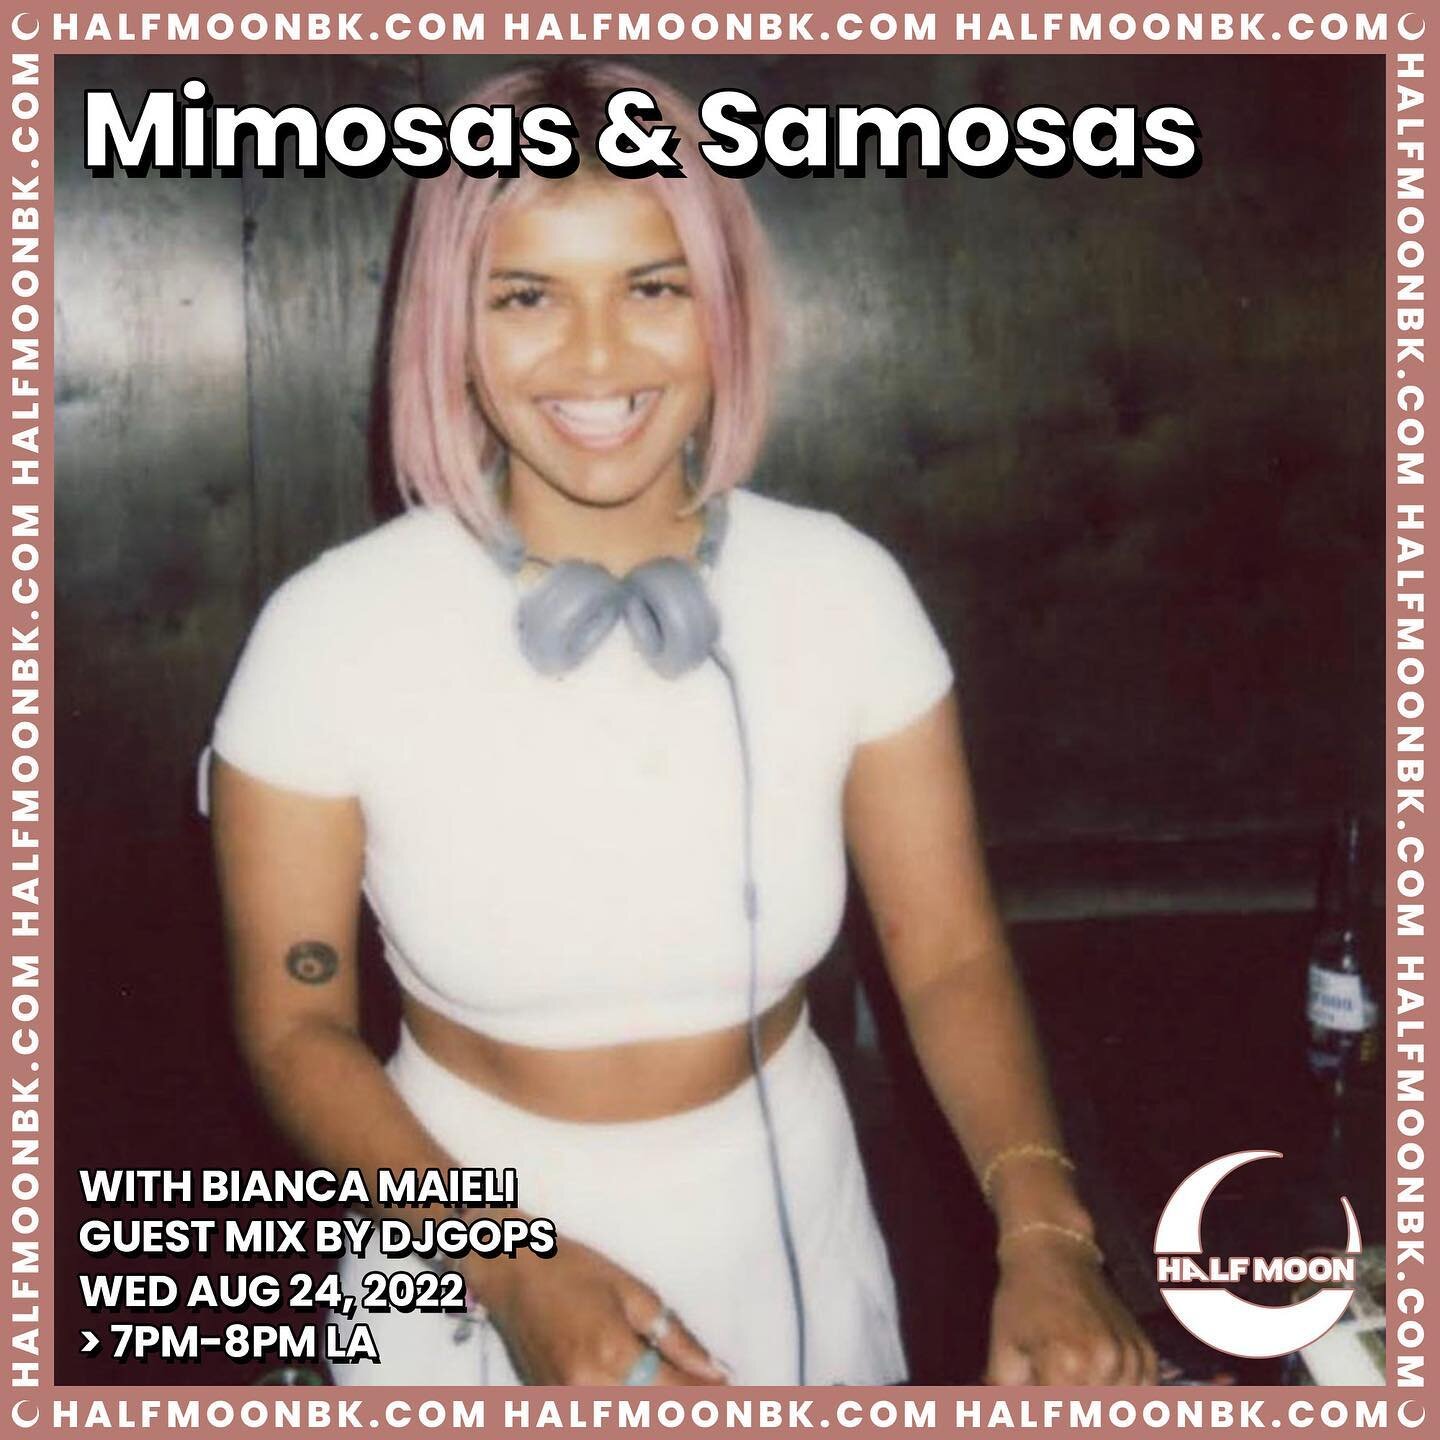 Mimosas &amp; Samosas is back on the @halfmoonbk airwaves today! 🥂🔊 

I have a fire guest mix by dj gops aka @braingobrrrrrrrr ++++ I&rsquo;ll be dropping new music by @xnywolf, @trackstar.global, @djflorentino with @bam_bii @kdonerd, &amp; more!

